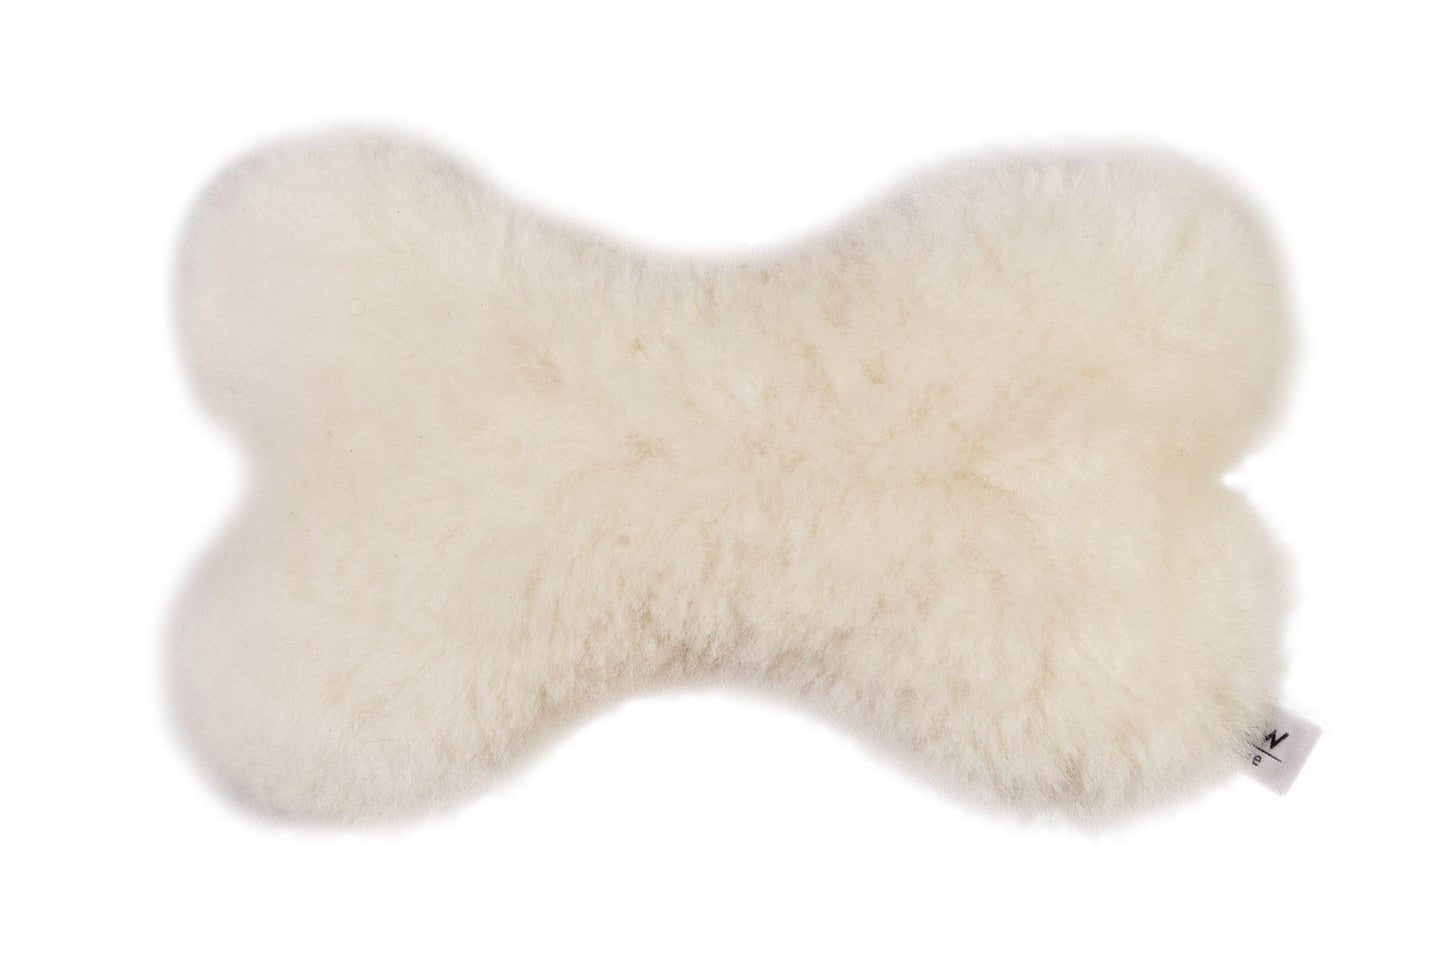 A soft Natural Sheepskin Dog Toy Bone from Mellow Pet Store on a bright white background.